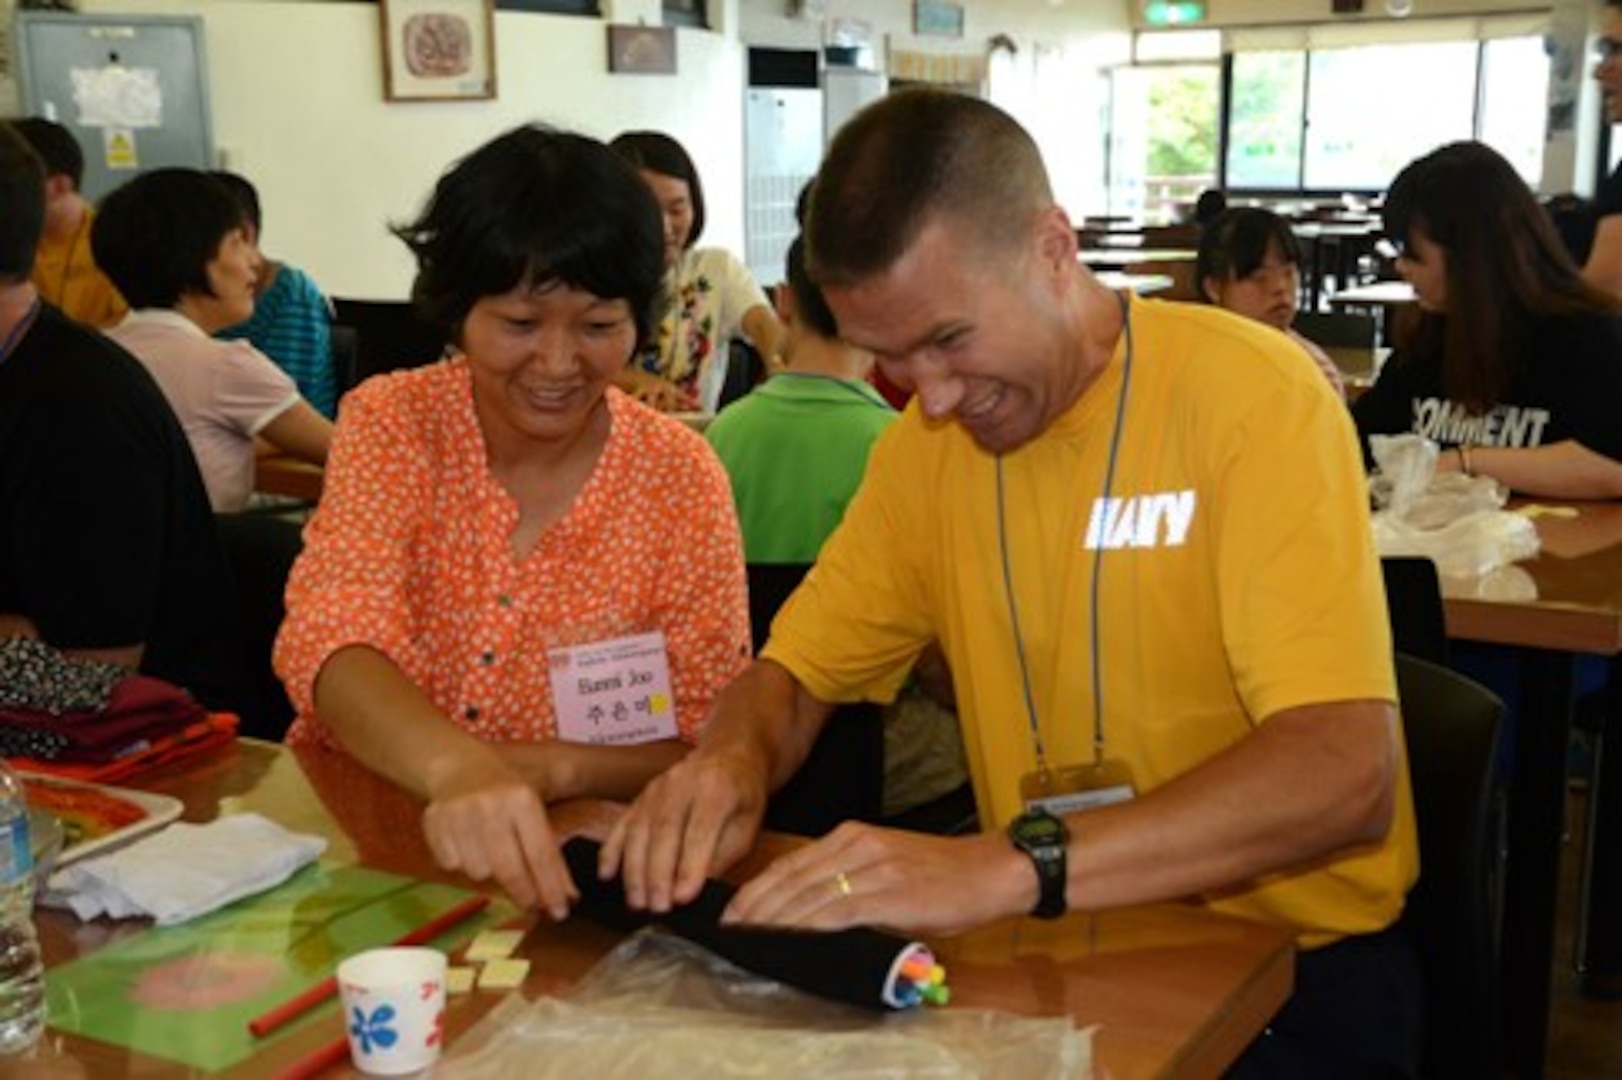 KOJE ISLAND, Republic of Korea (August 24, 2014) Cmdr. Erik Karlson, from Commander, U.S. Naval Forces Korea, practices making gimbop, a traditional Korean snack food, with help from a resident as part of the lunch preparation during a U.S. Navy visit designed to build relationships with the community at Aikwangwon, a home and school for the mentally and physically disabled, on Koje Island, Republic of Korea, August 24. (U.S. Navy photo by Chief Mass Communication Specialist Wendy Wyman/Released) 